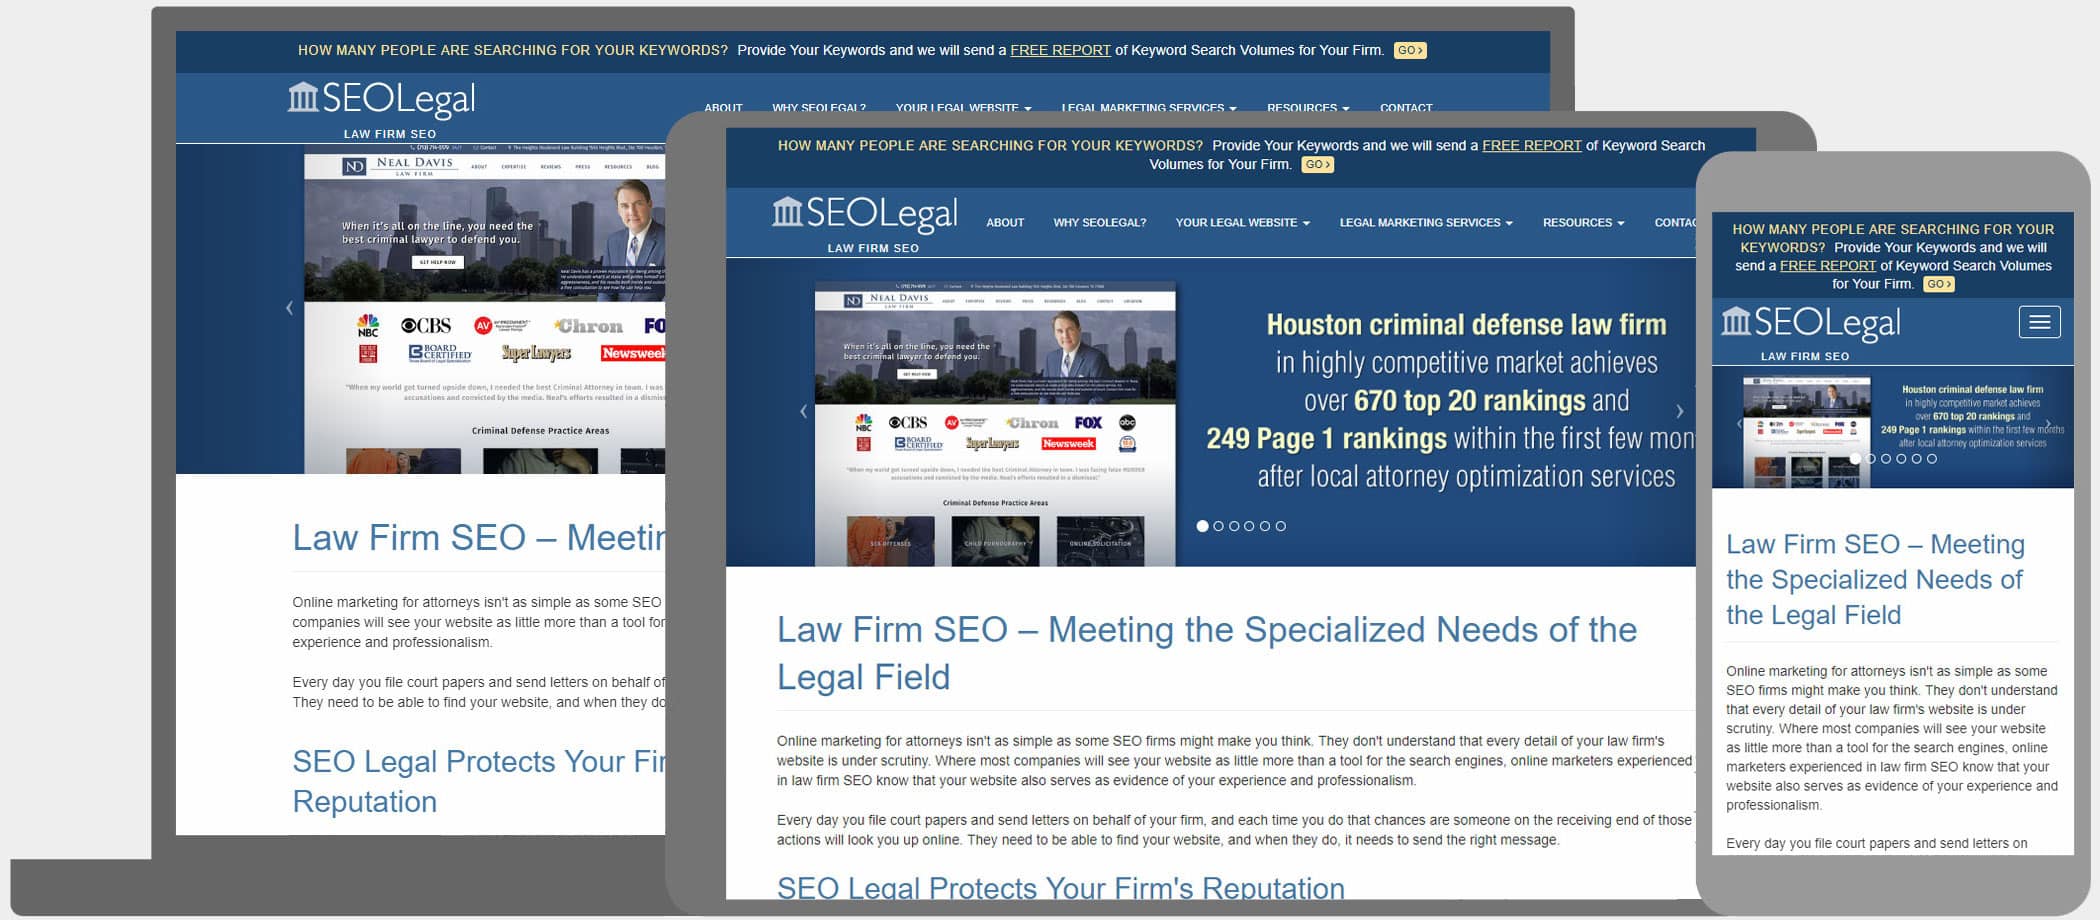 SEO Legal: SEO friendly design featuring blog and responsive site